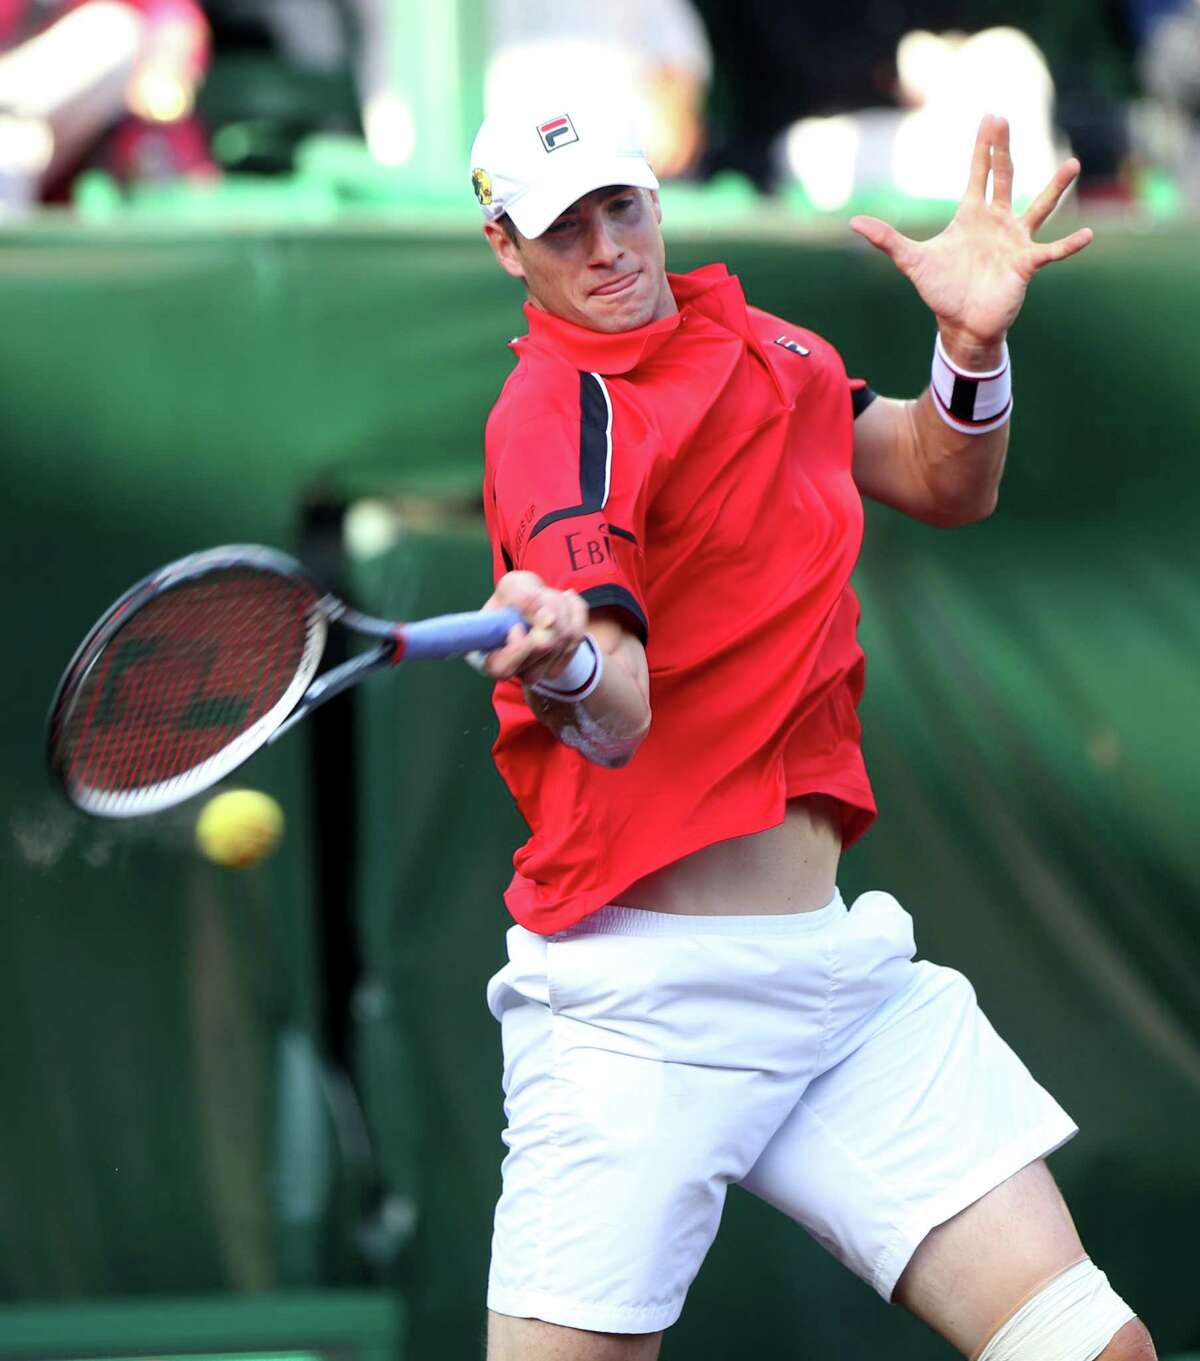 John Isner (USA) returns a hit to Hyeon Chung (KOR) in a quarter final match at the U.S. Men's Clay Court Championships at River Oaks Country Club, Friday, April 8, 2016, in Houston, Texas. Isner won, 7-6(5), 6-4.